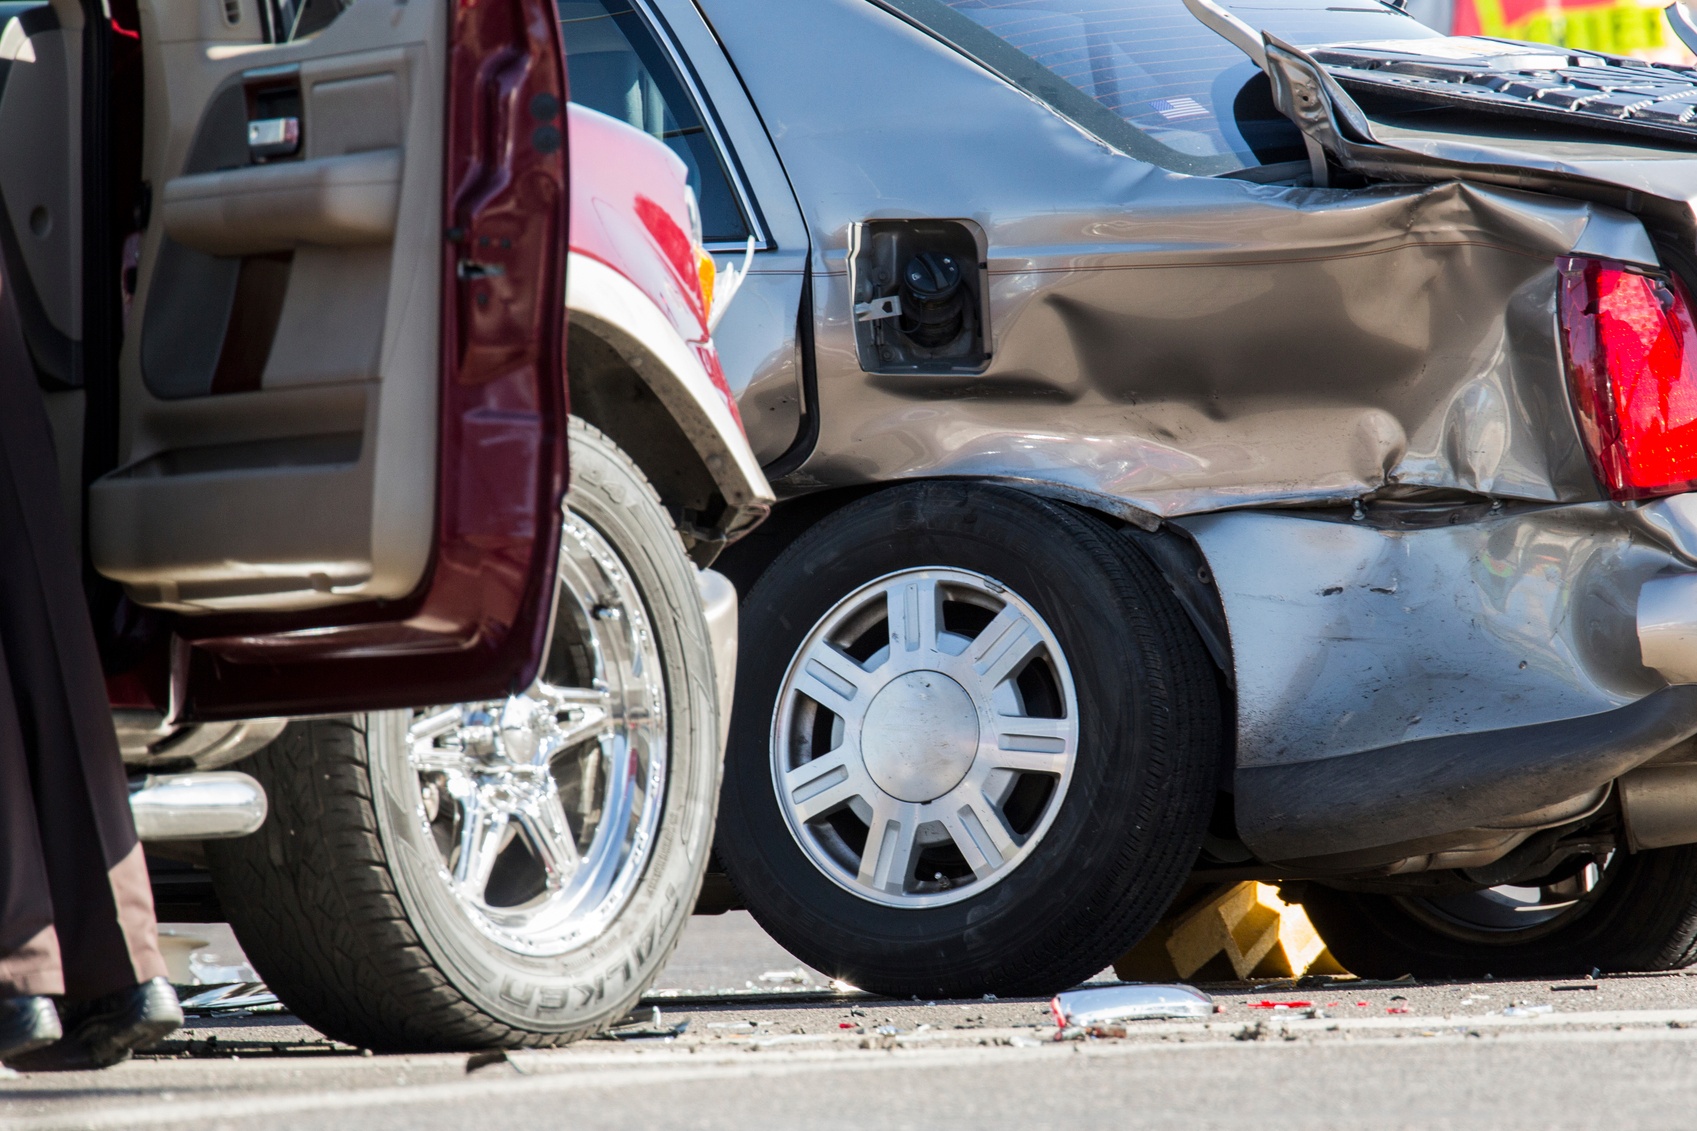 When Should I Go To The Chiropractor After A Car Accident?